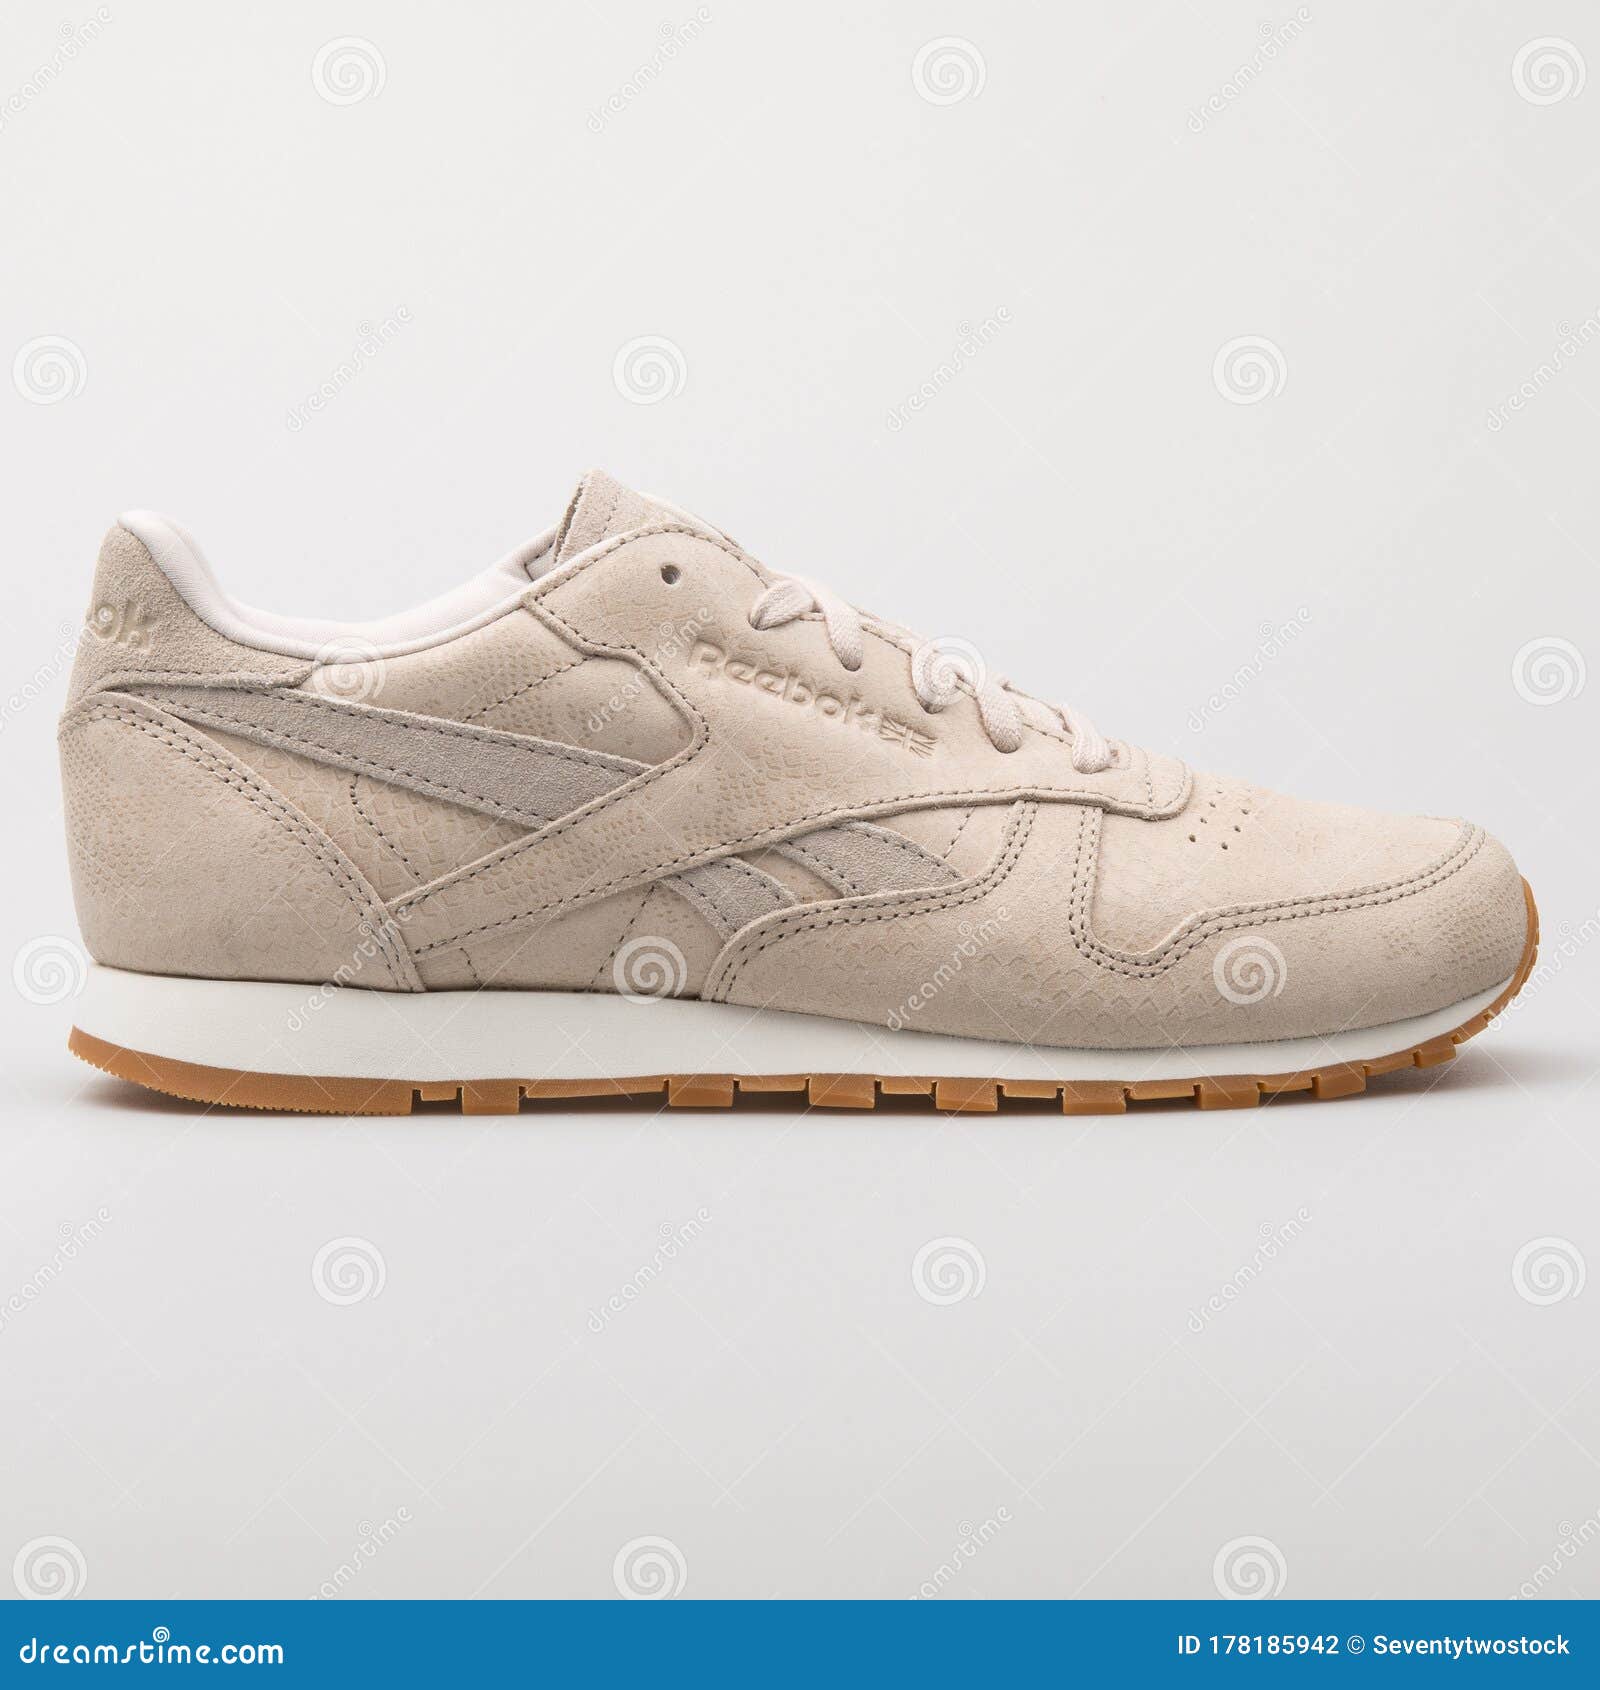 Reebok Classic Leather Exotics Beige Sneaker Editorial Photography - Image of shoe, item: 178185942